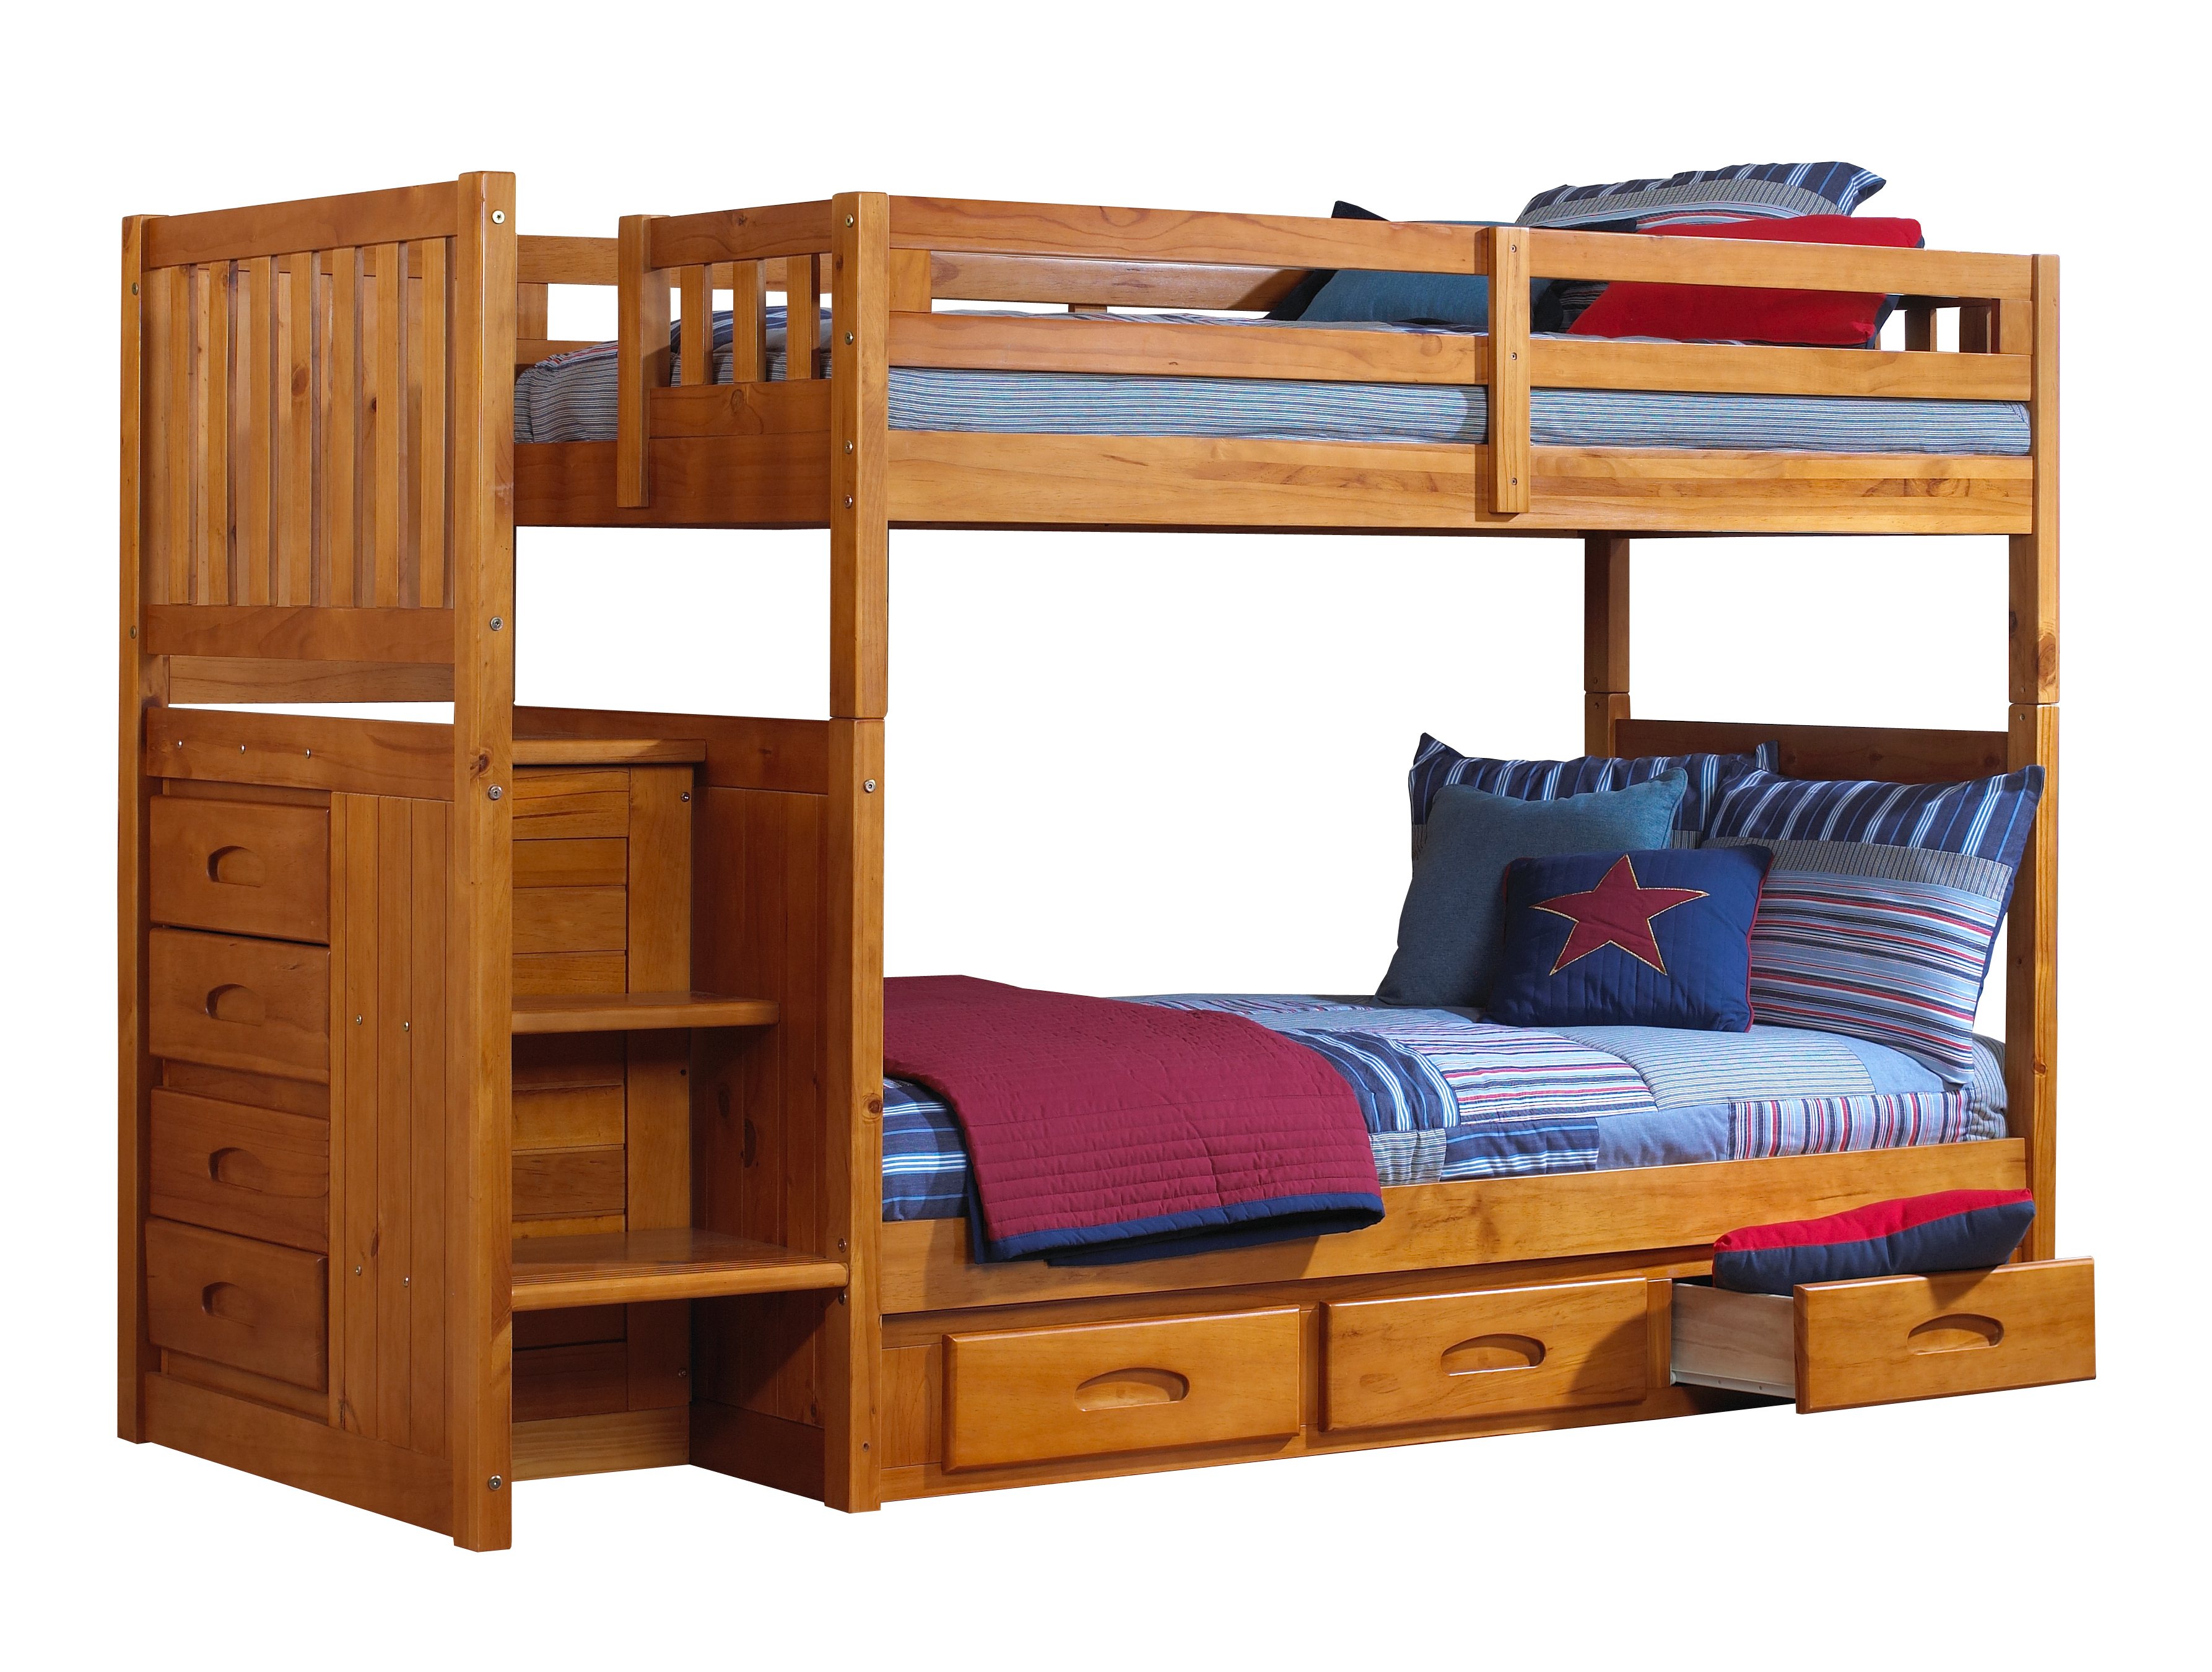 Twin Honey Mission Staircase Bunk Beds, Bunk Beds With Stairs And Storage